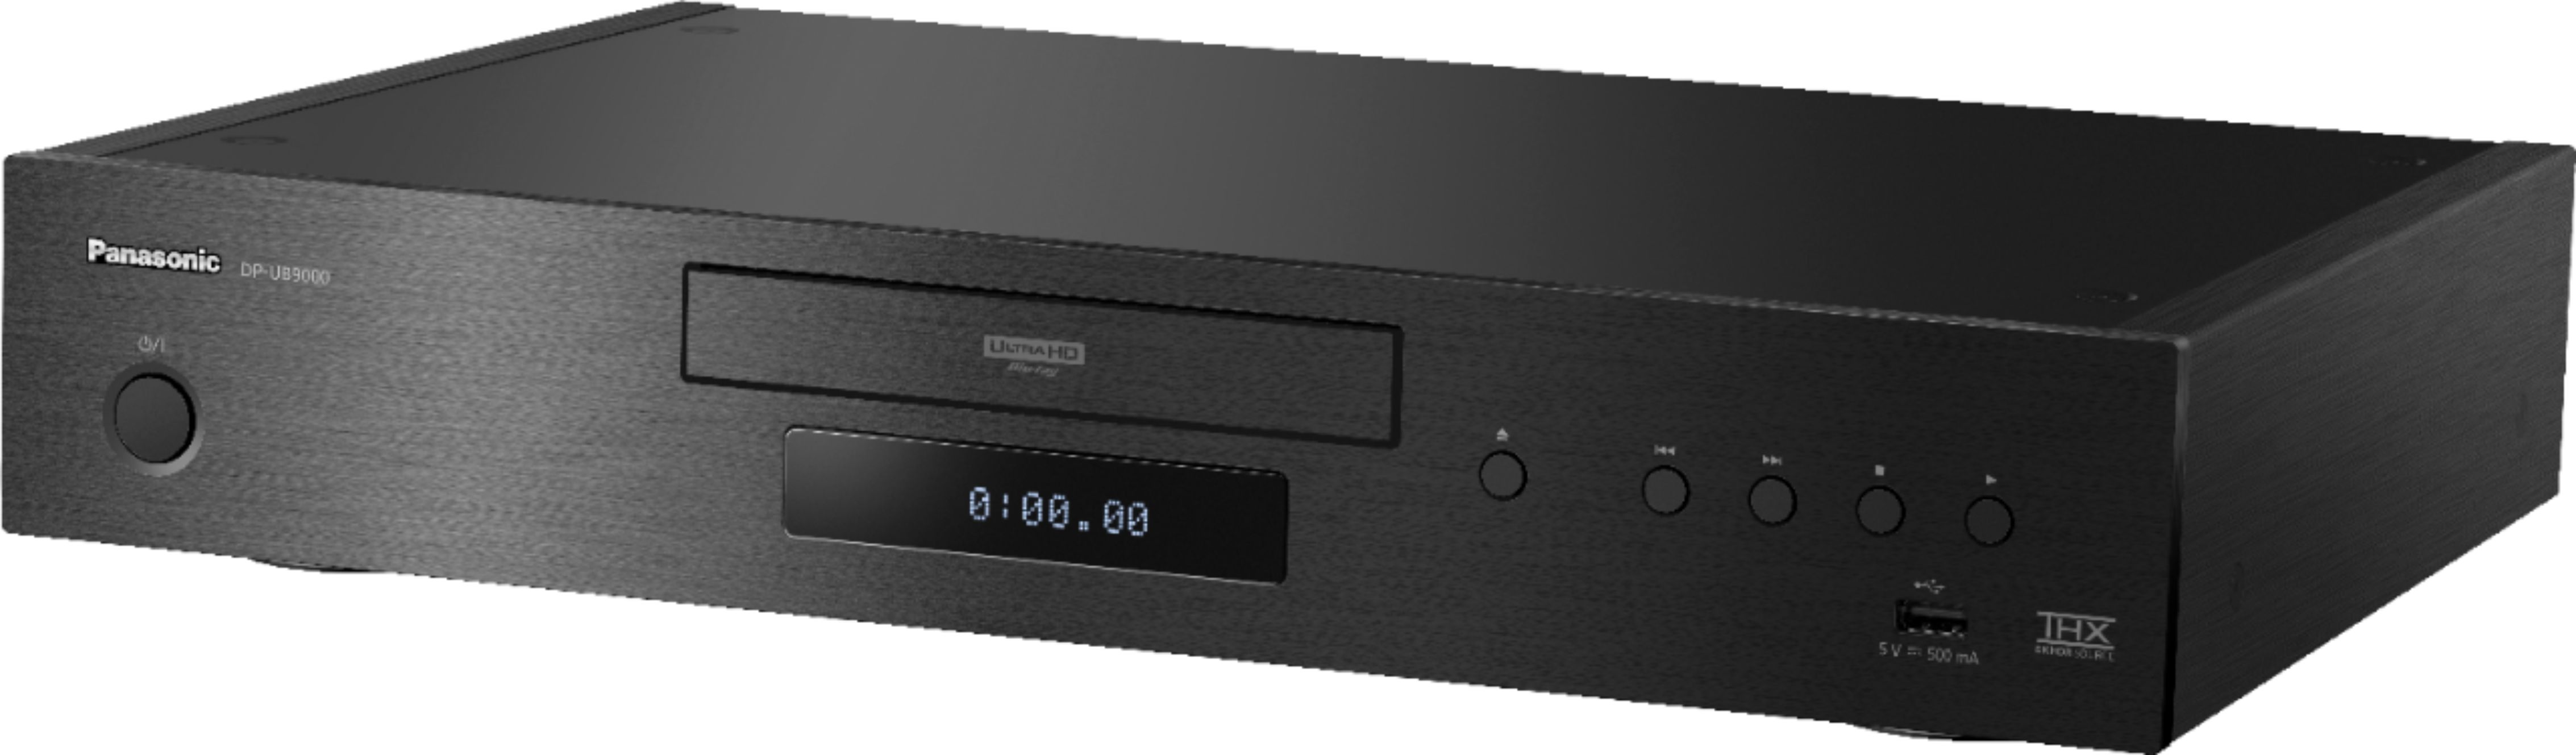 Best Buy: Panasonic Streaming 4K Ultra HD Hi-Res Audio with Dolby